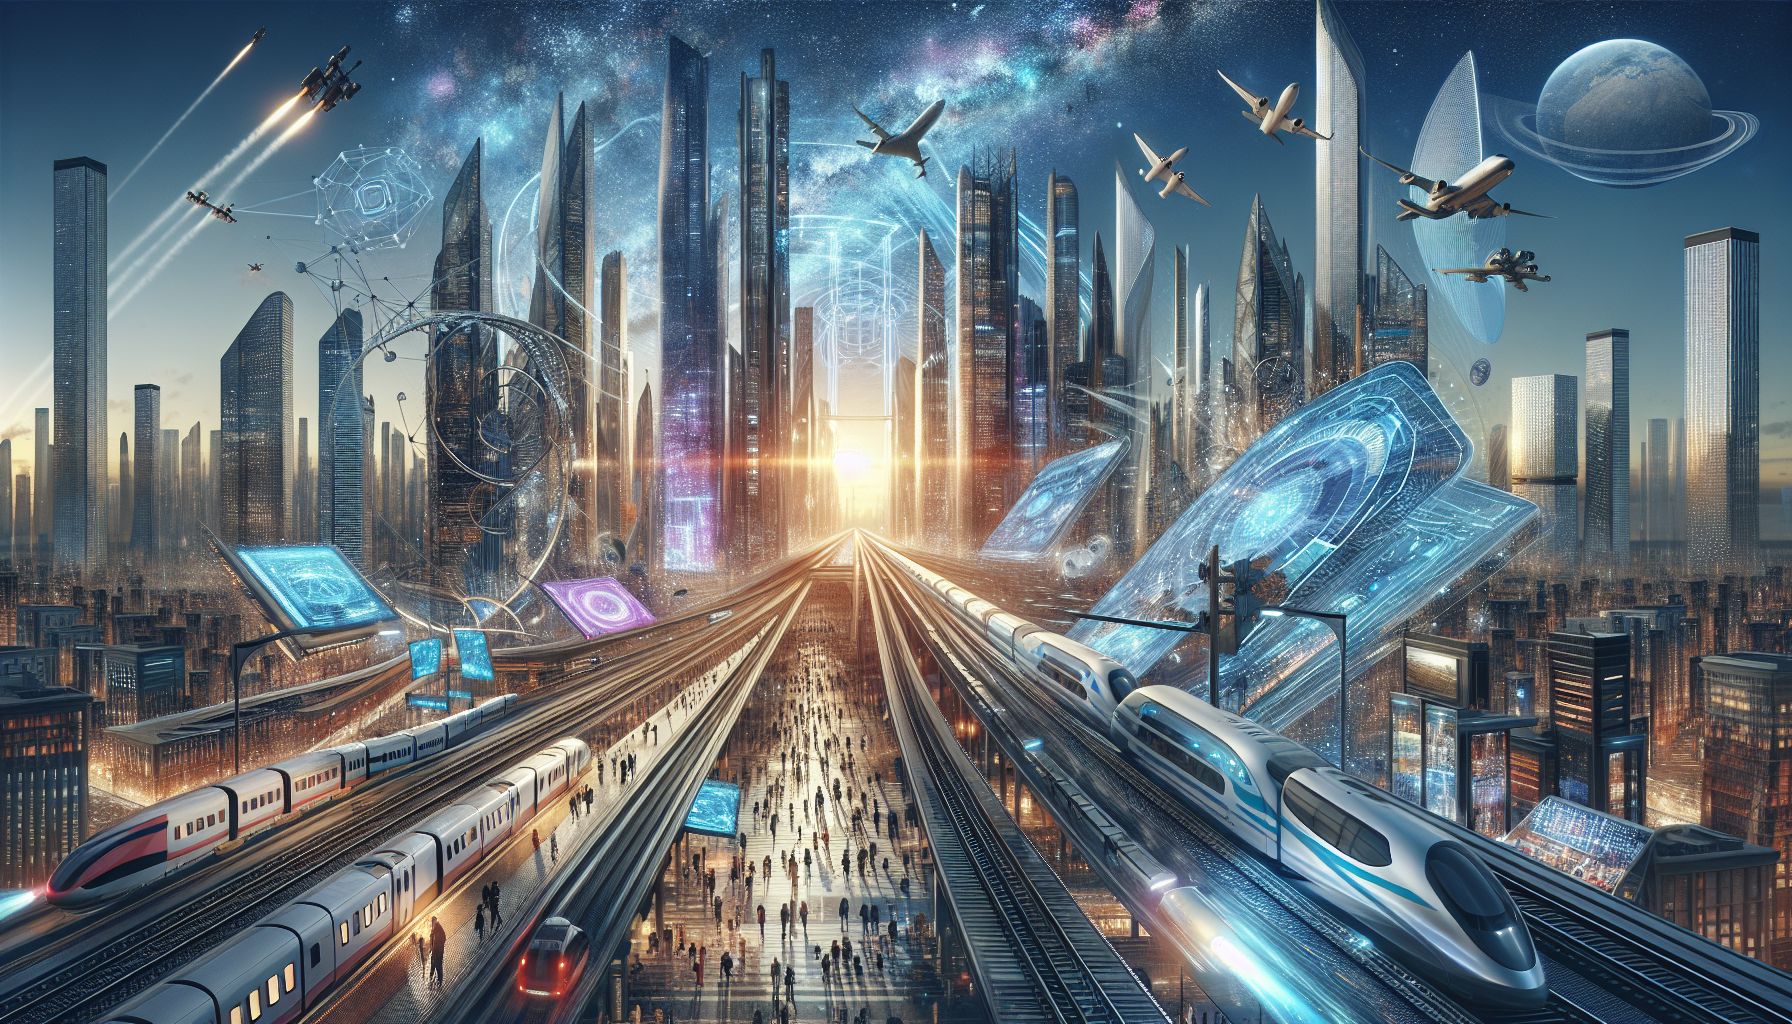 Slicing Through the Skyline: Travel Meets Technology in a Revolution of New Adventures